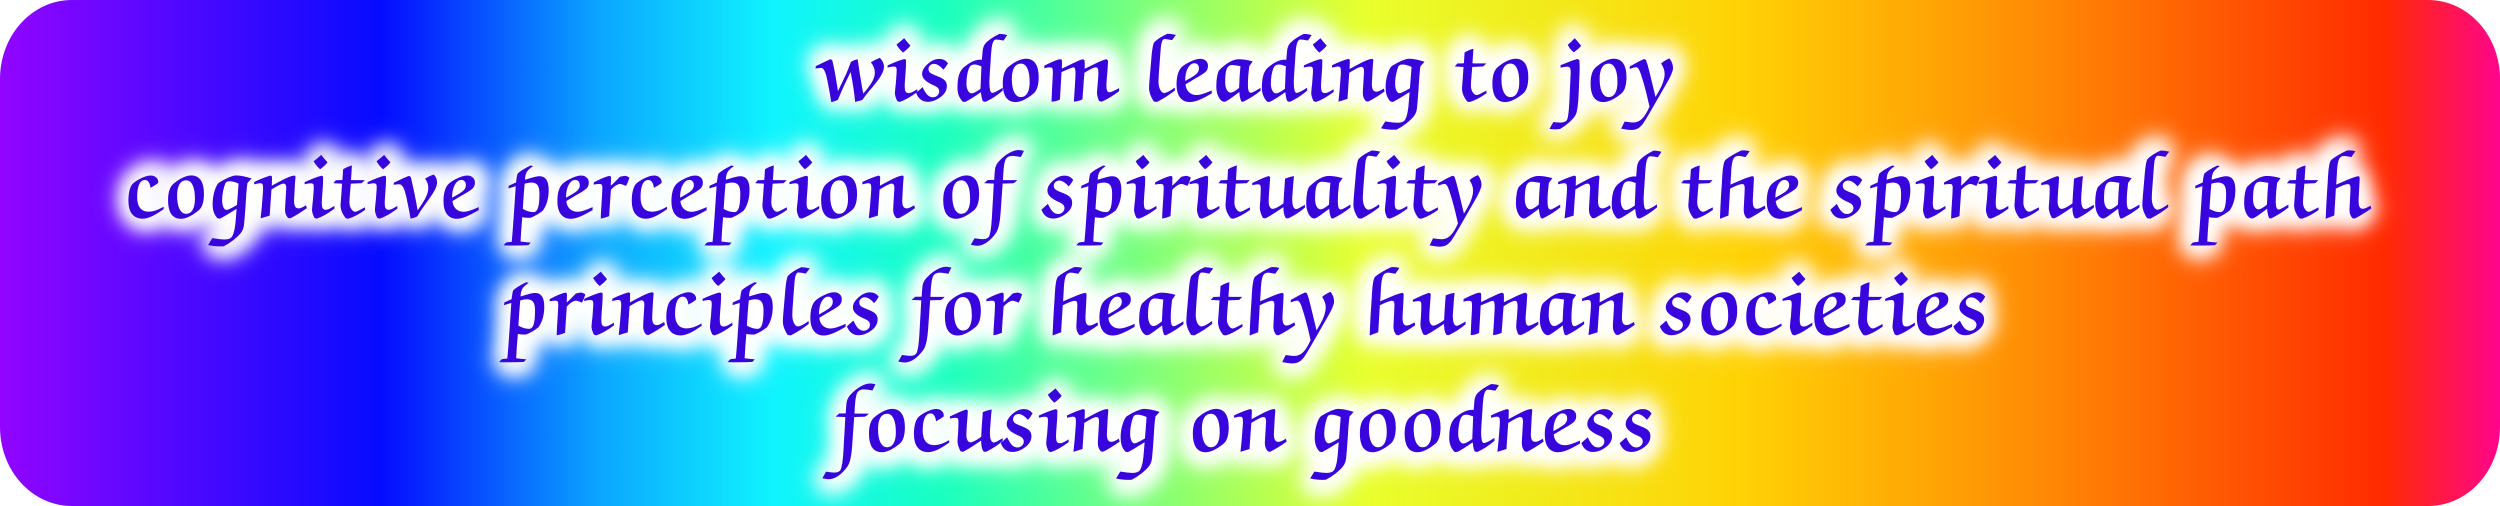 Wisdom leading to joy, Cognitive perception of spirituality and the spiritual path, Principles for healthy human societies, Focusing on goodness